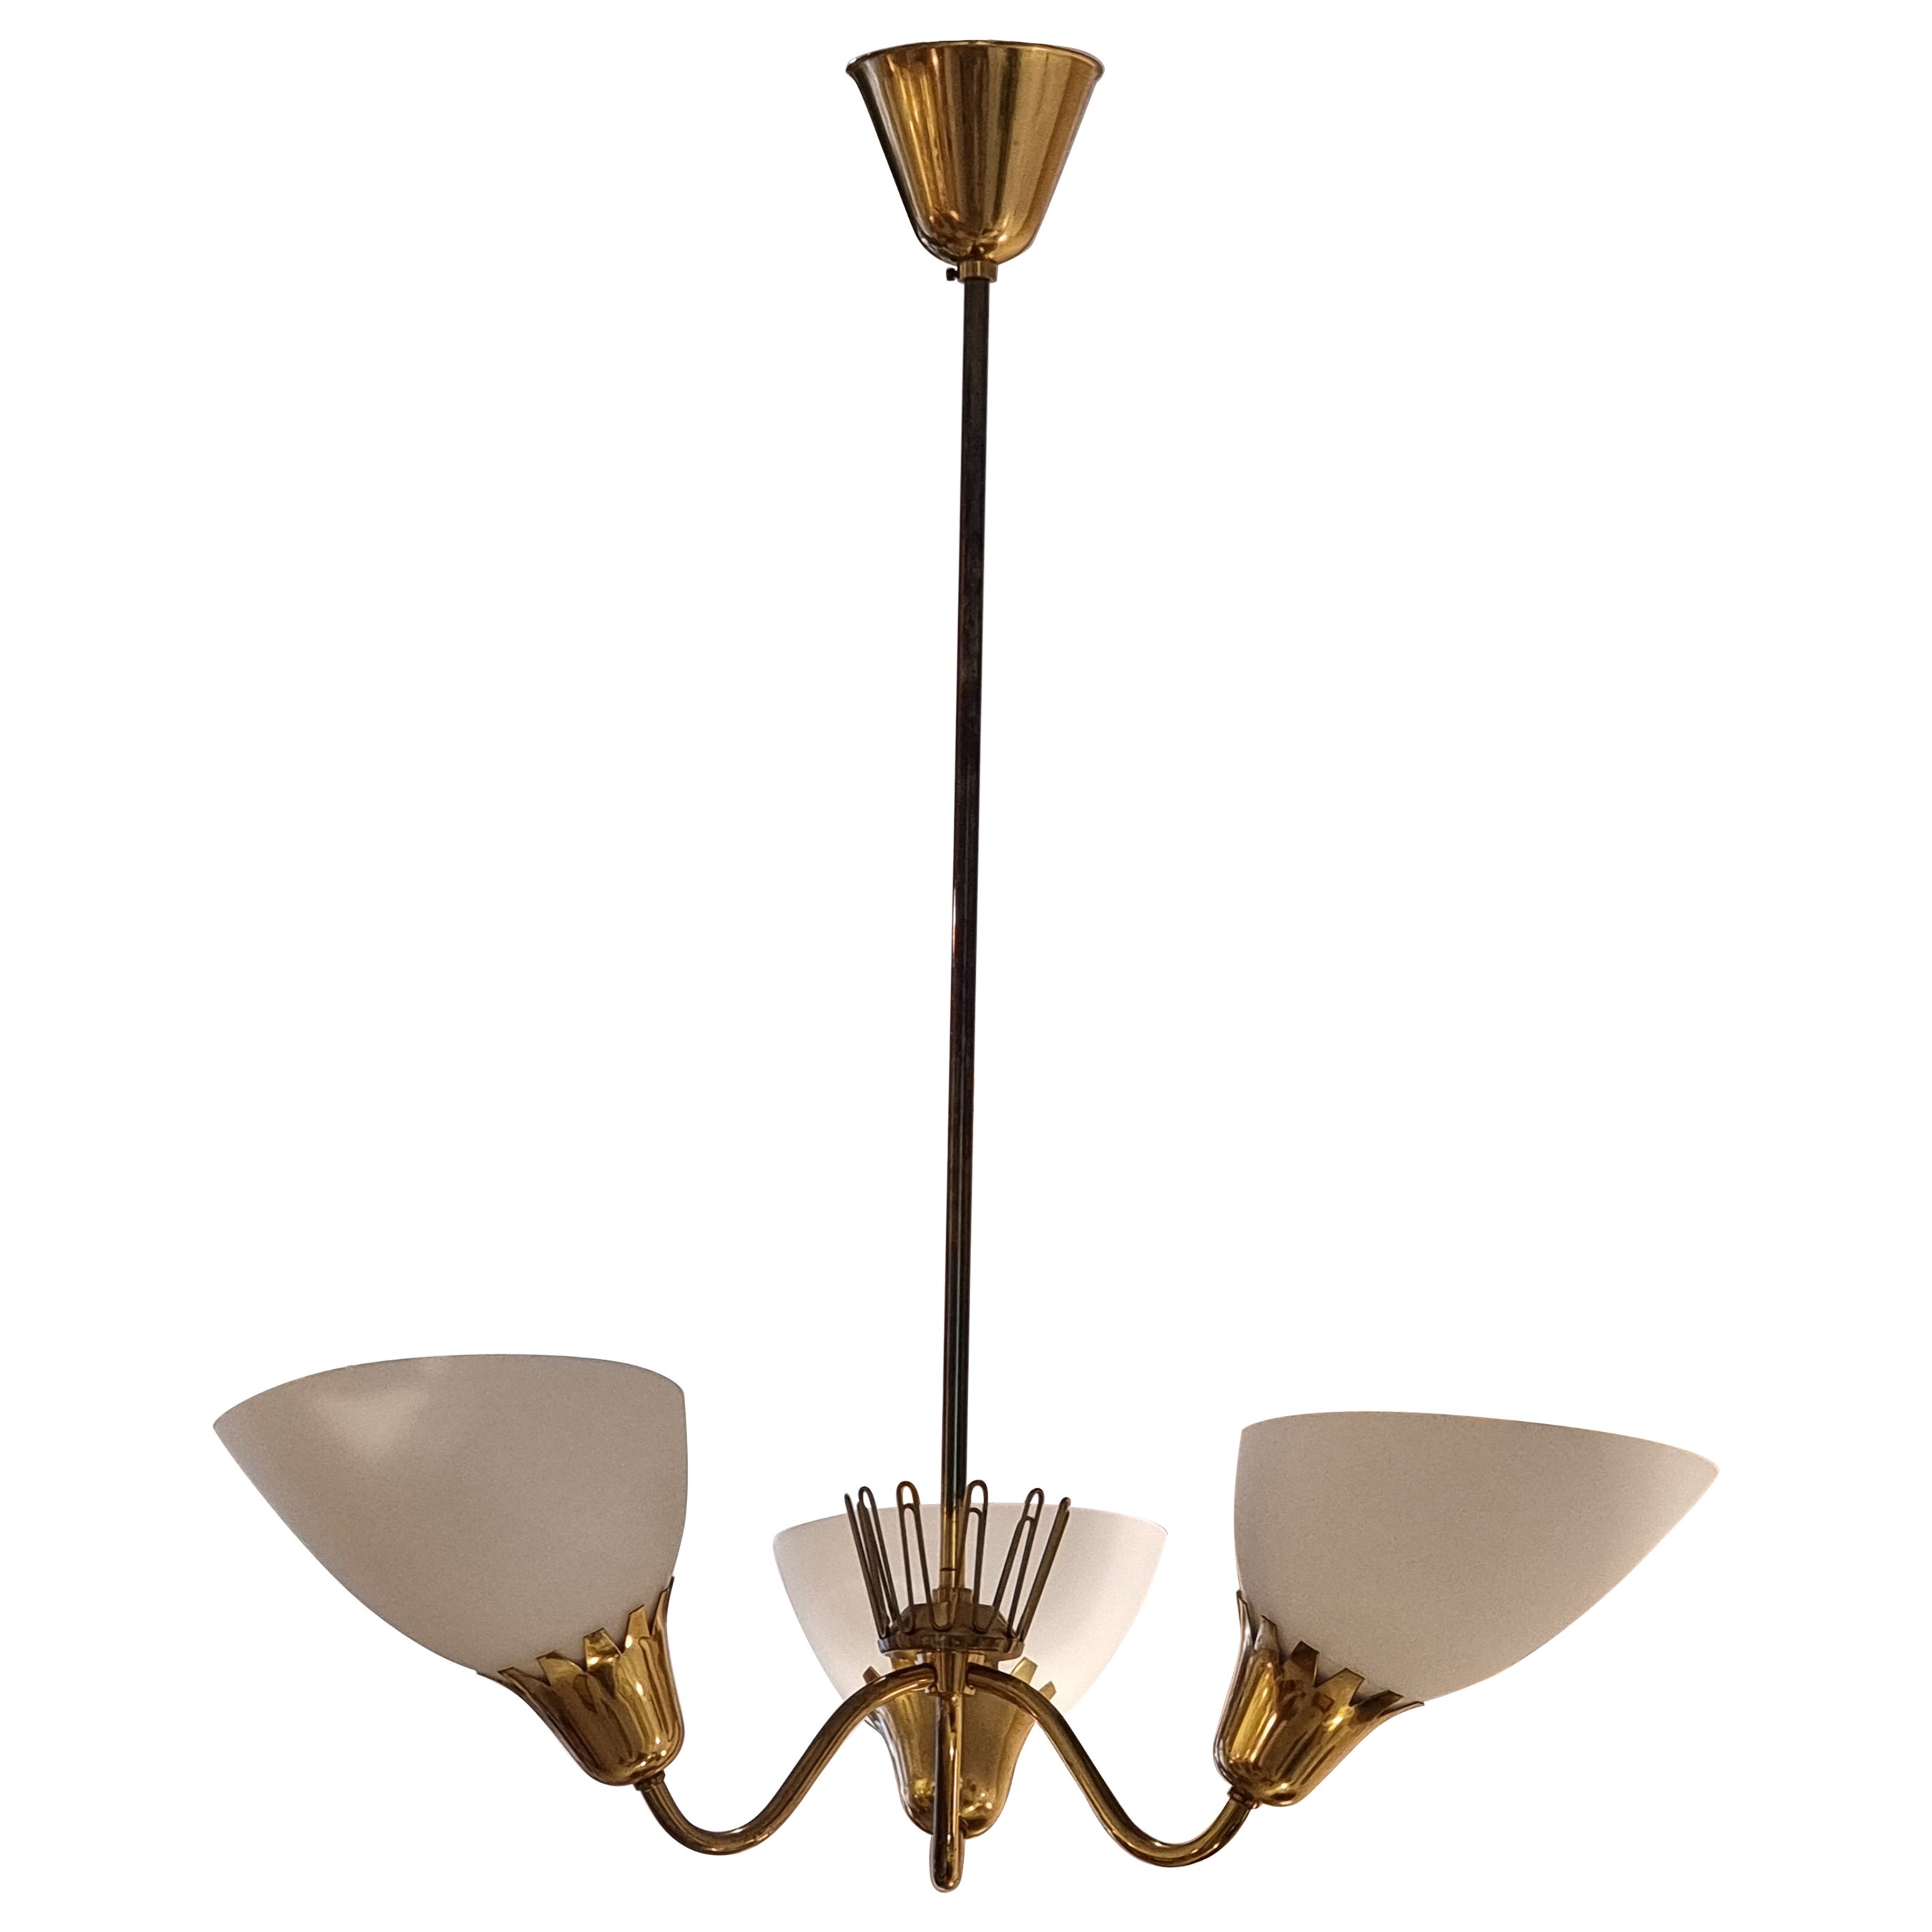 ASEA pendant in brass with glass shades, Scandinavian Modern, Sweden mid-1900s.